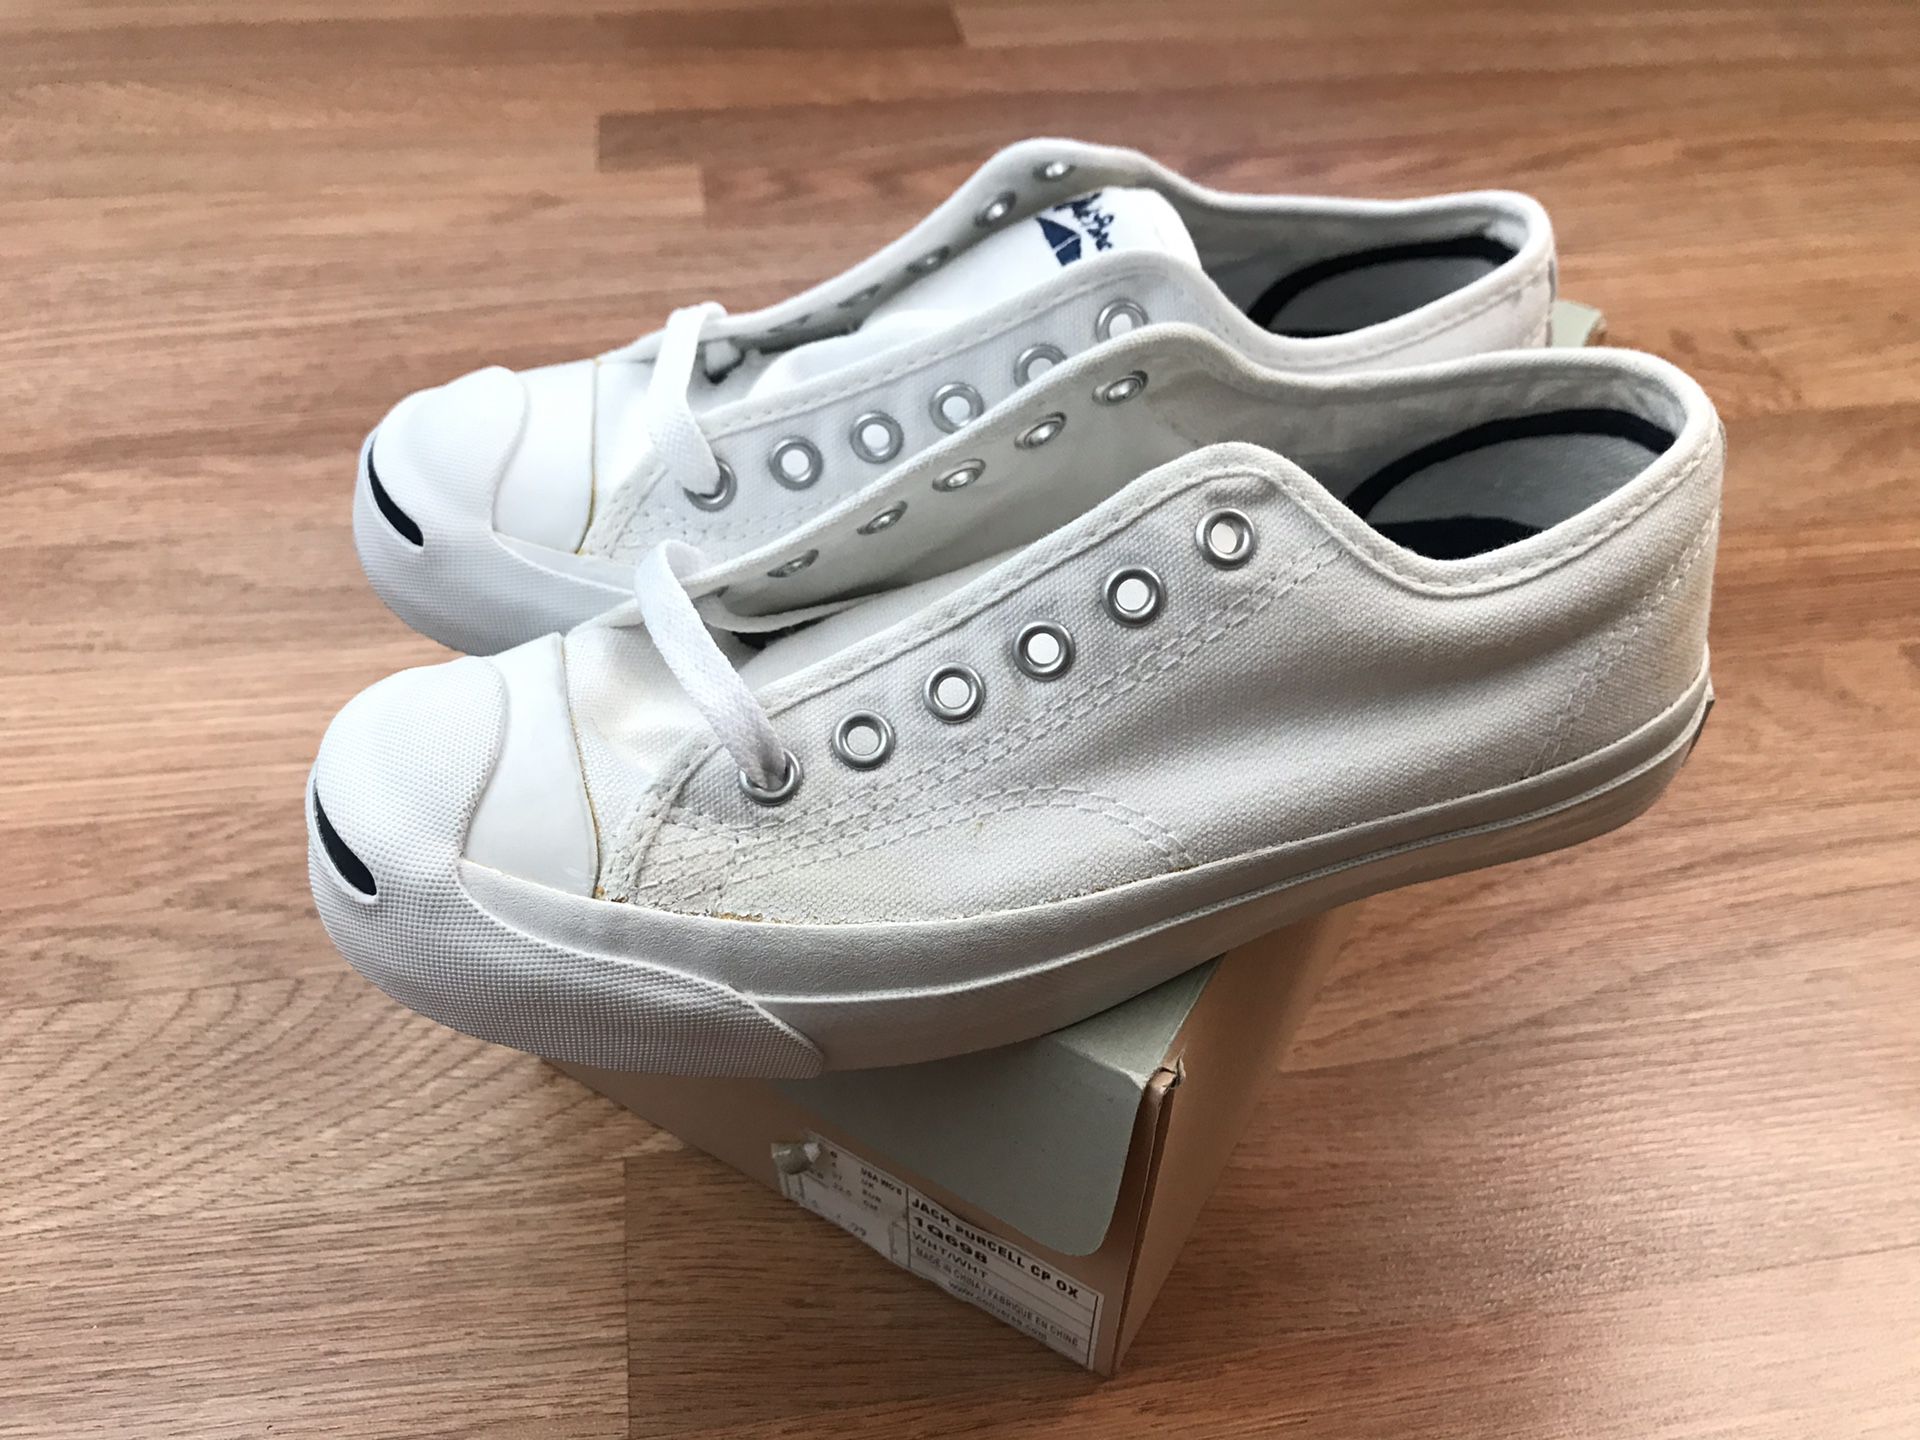 VINTAGE VTG CONVERSE JACK PURCELL SHOES SNEAKERS TENNIS MENS 4.5 WOMENS 6 WHITE CANVAS OX OXFORD DS DEADSTOCK